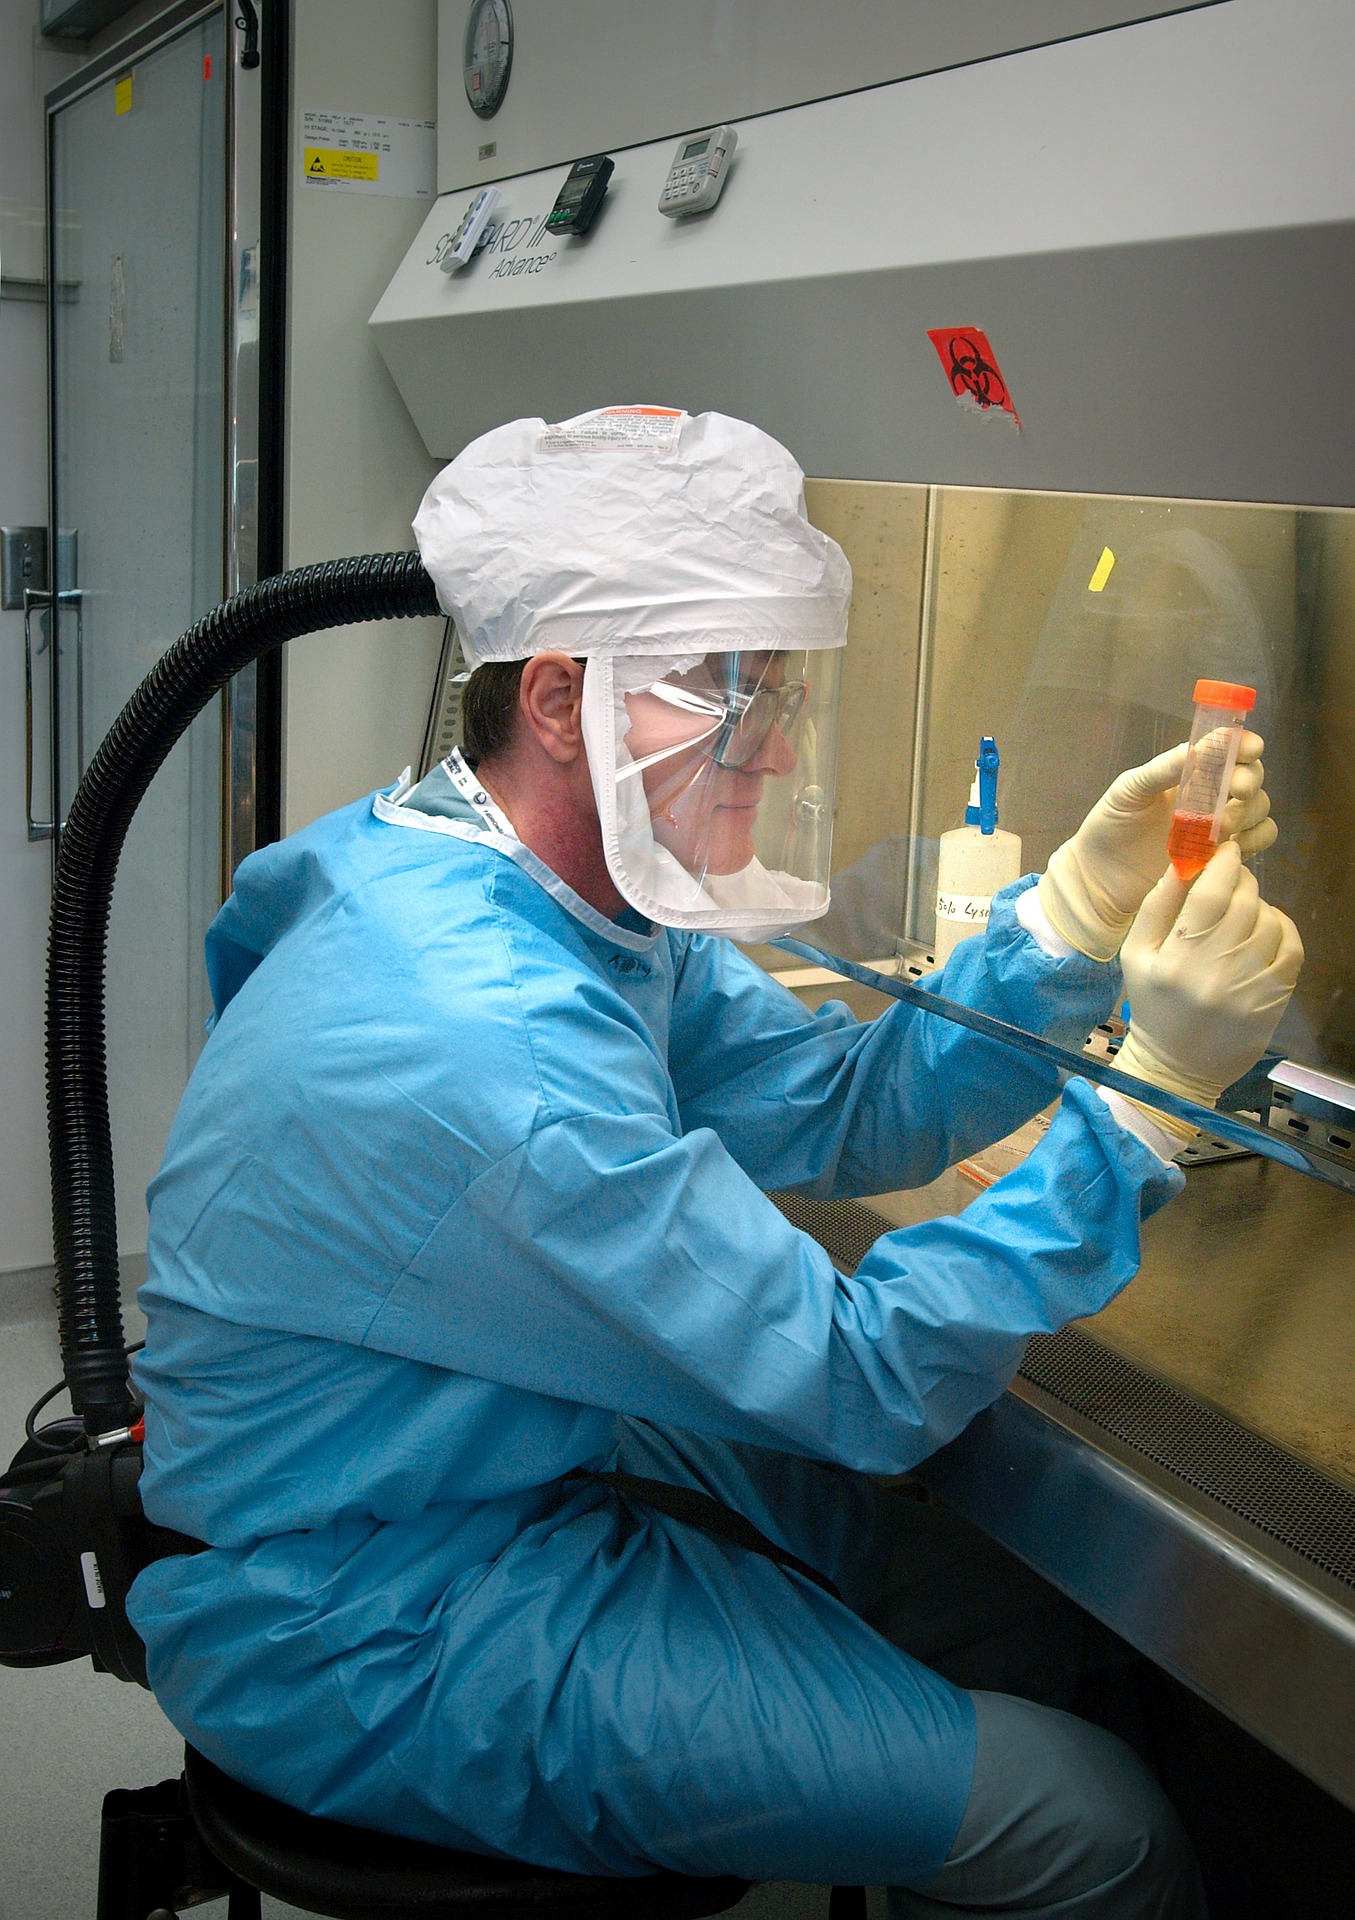 Microbiologist holding a test tube inside the laboratory